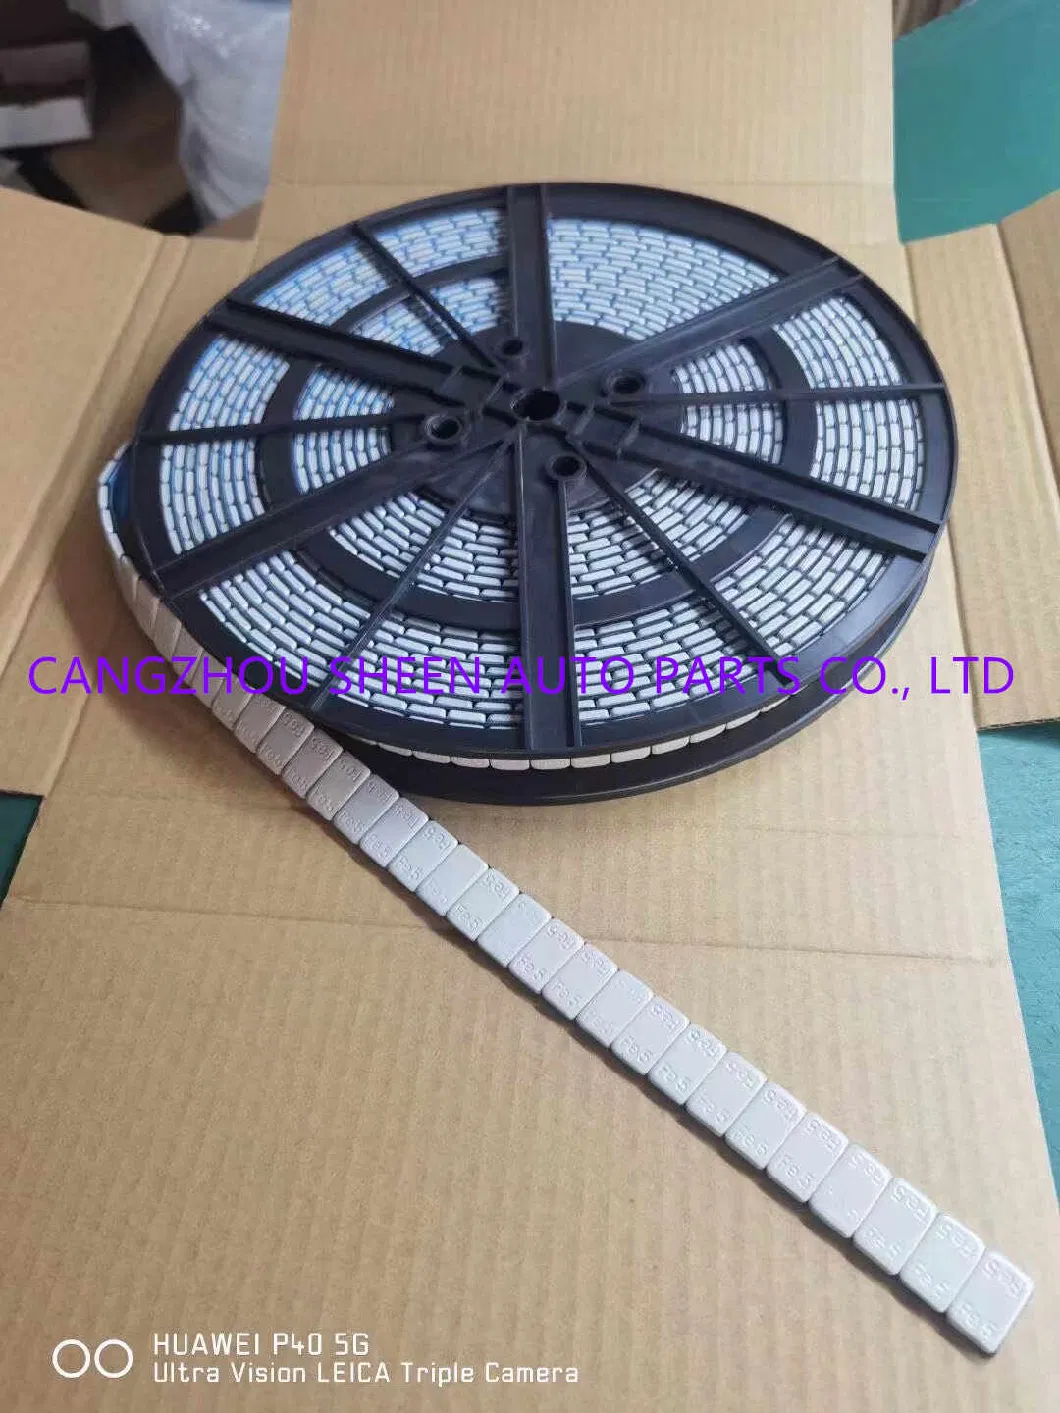 5kg Fe Stick on/Adhesive Zinc Coated in Roll Wheel Balance Weight